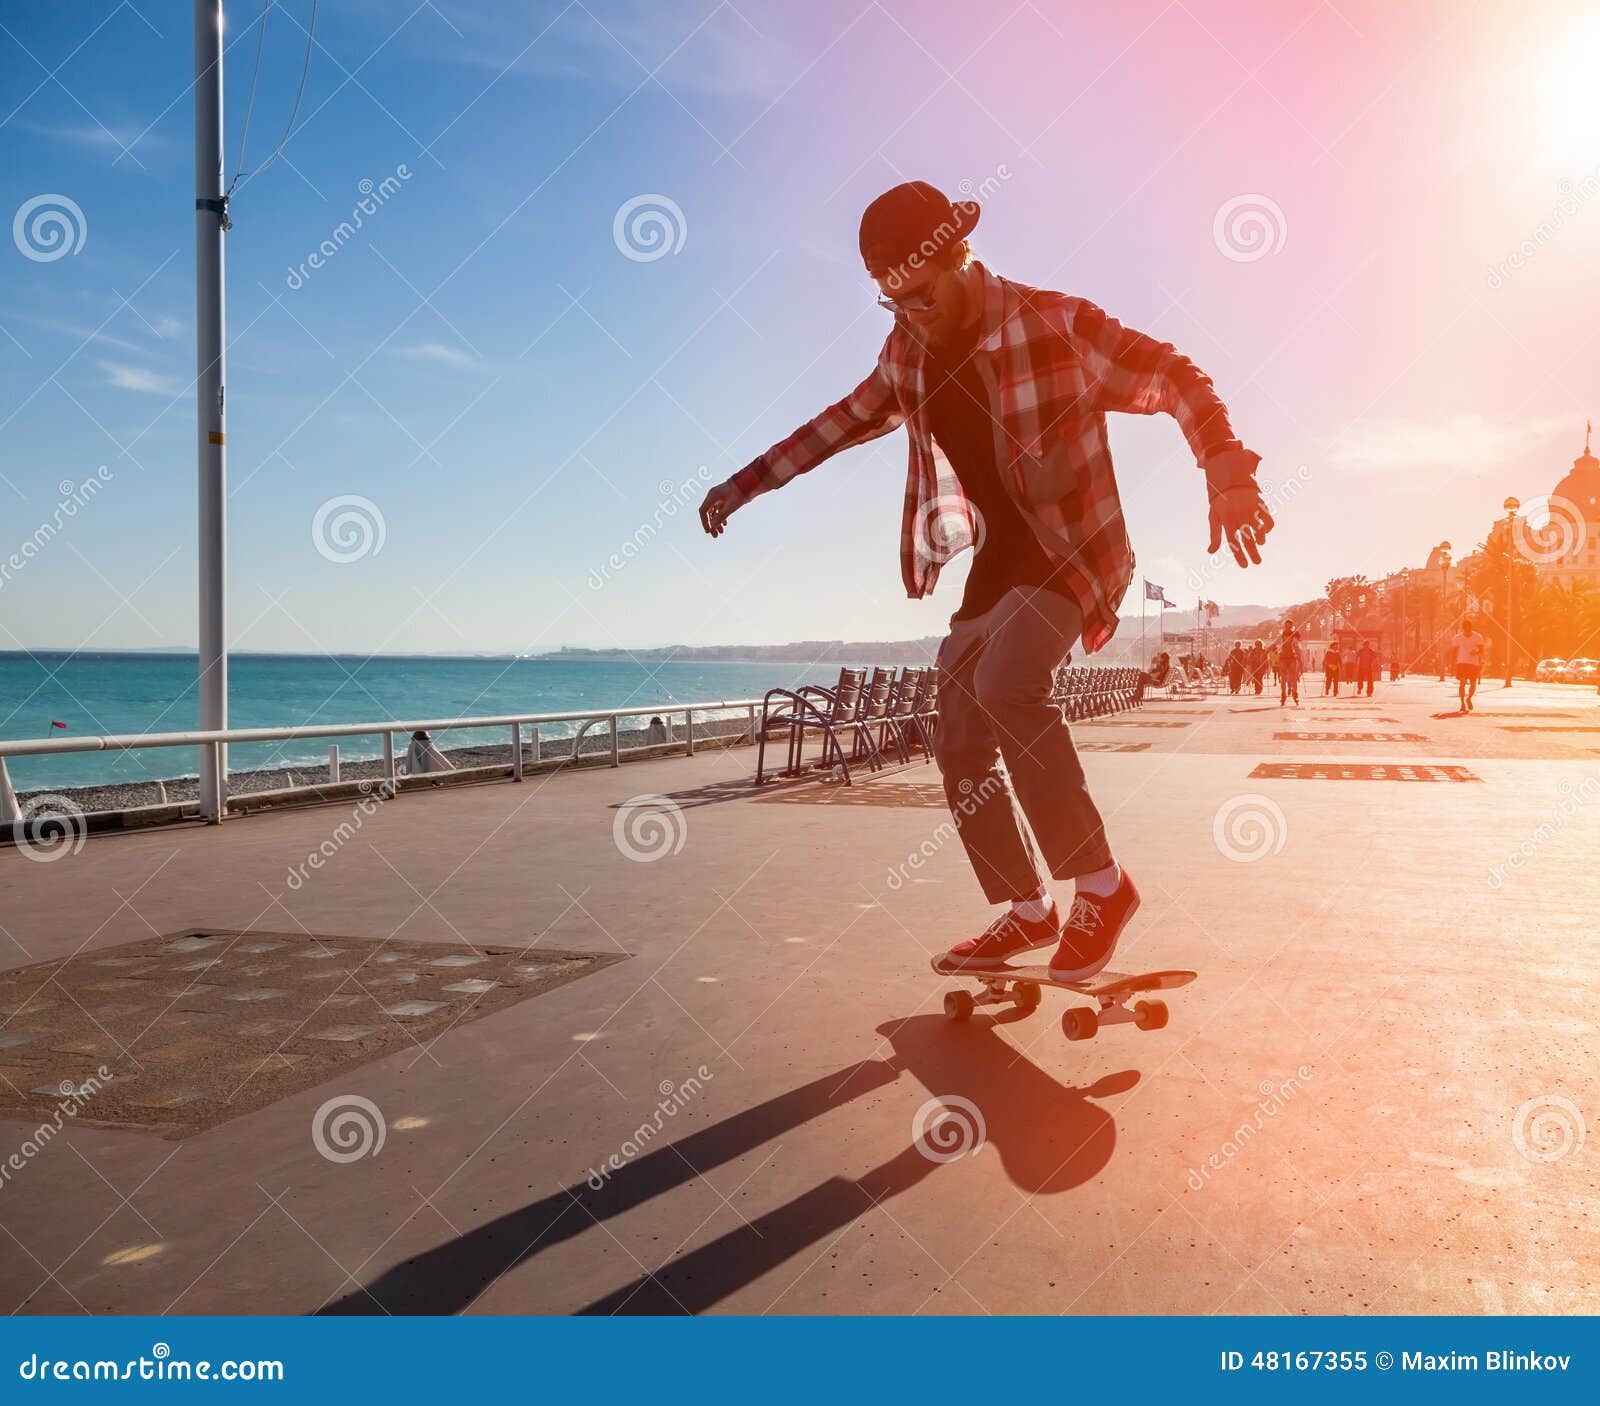 Sunlight over Legs of Person on Skateboard · Free Stock Photo